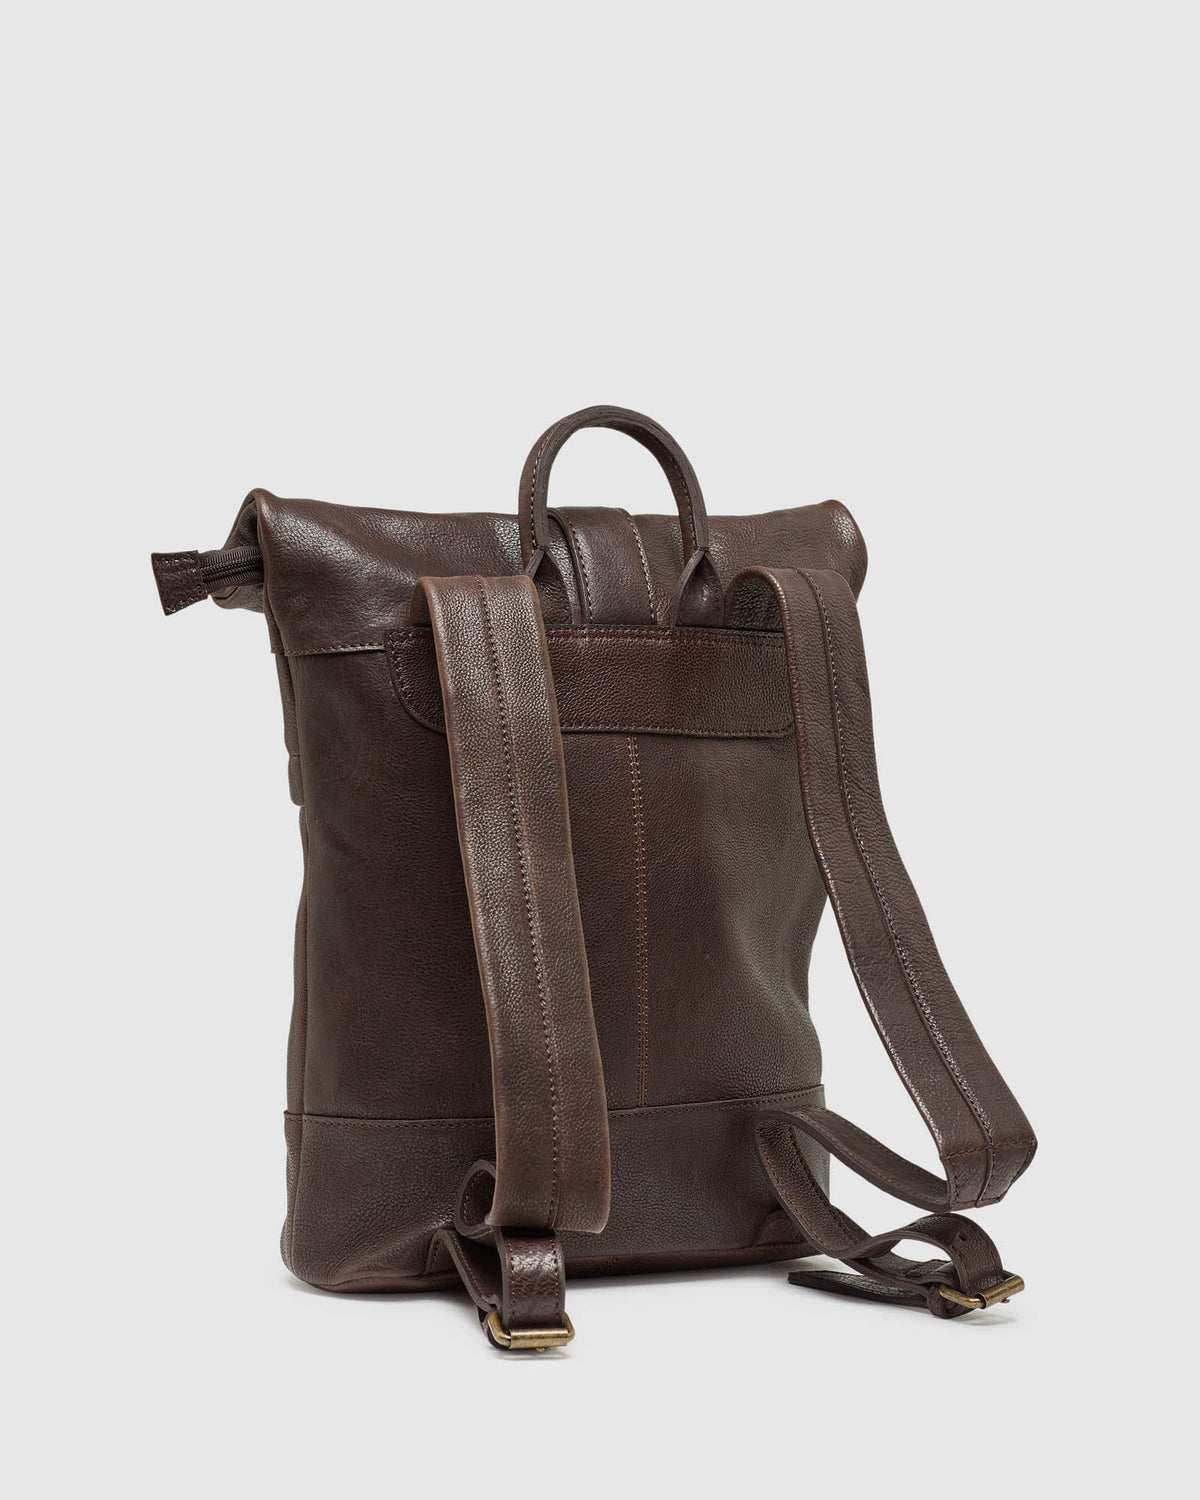 ANGUS LEATHER BACK PACK BAG